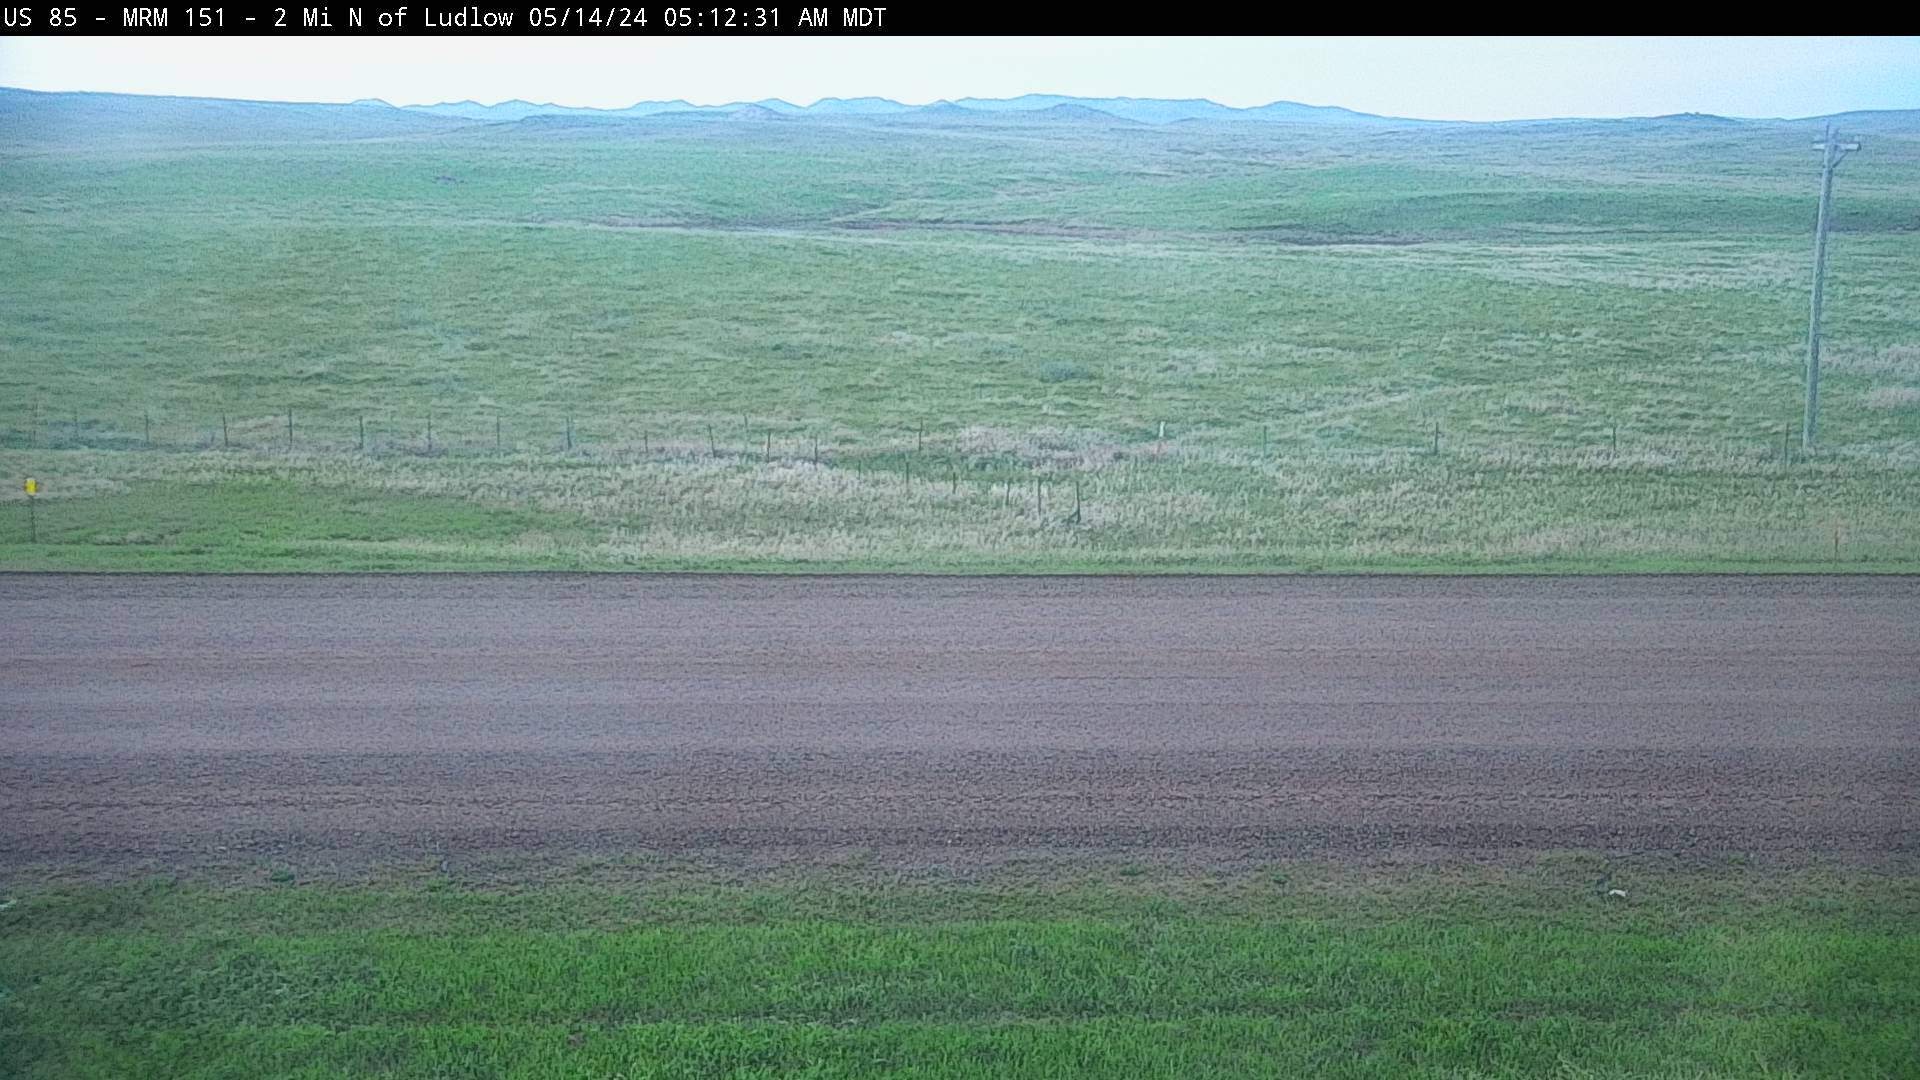 2 miles north of town along US-85 2 MP 150.1 - East Traffic Camera